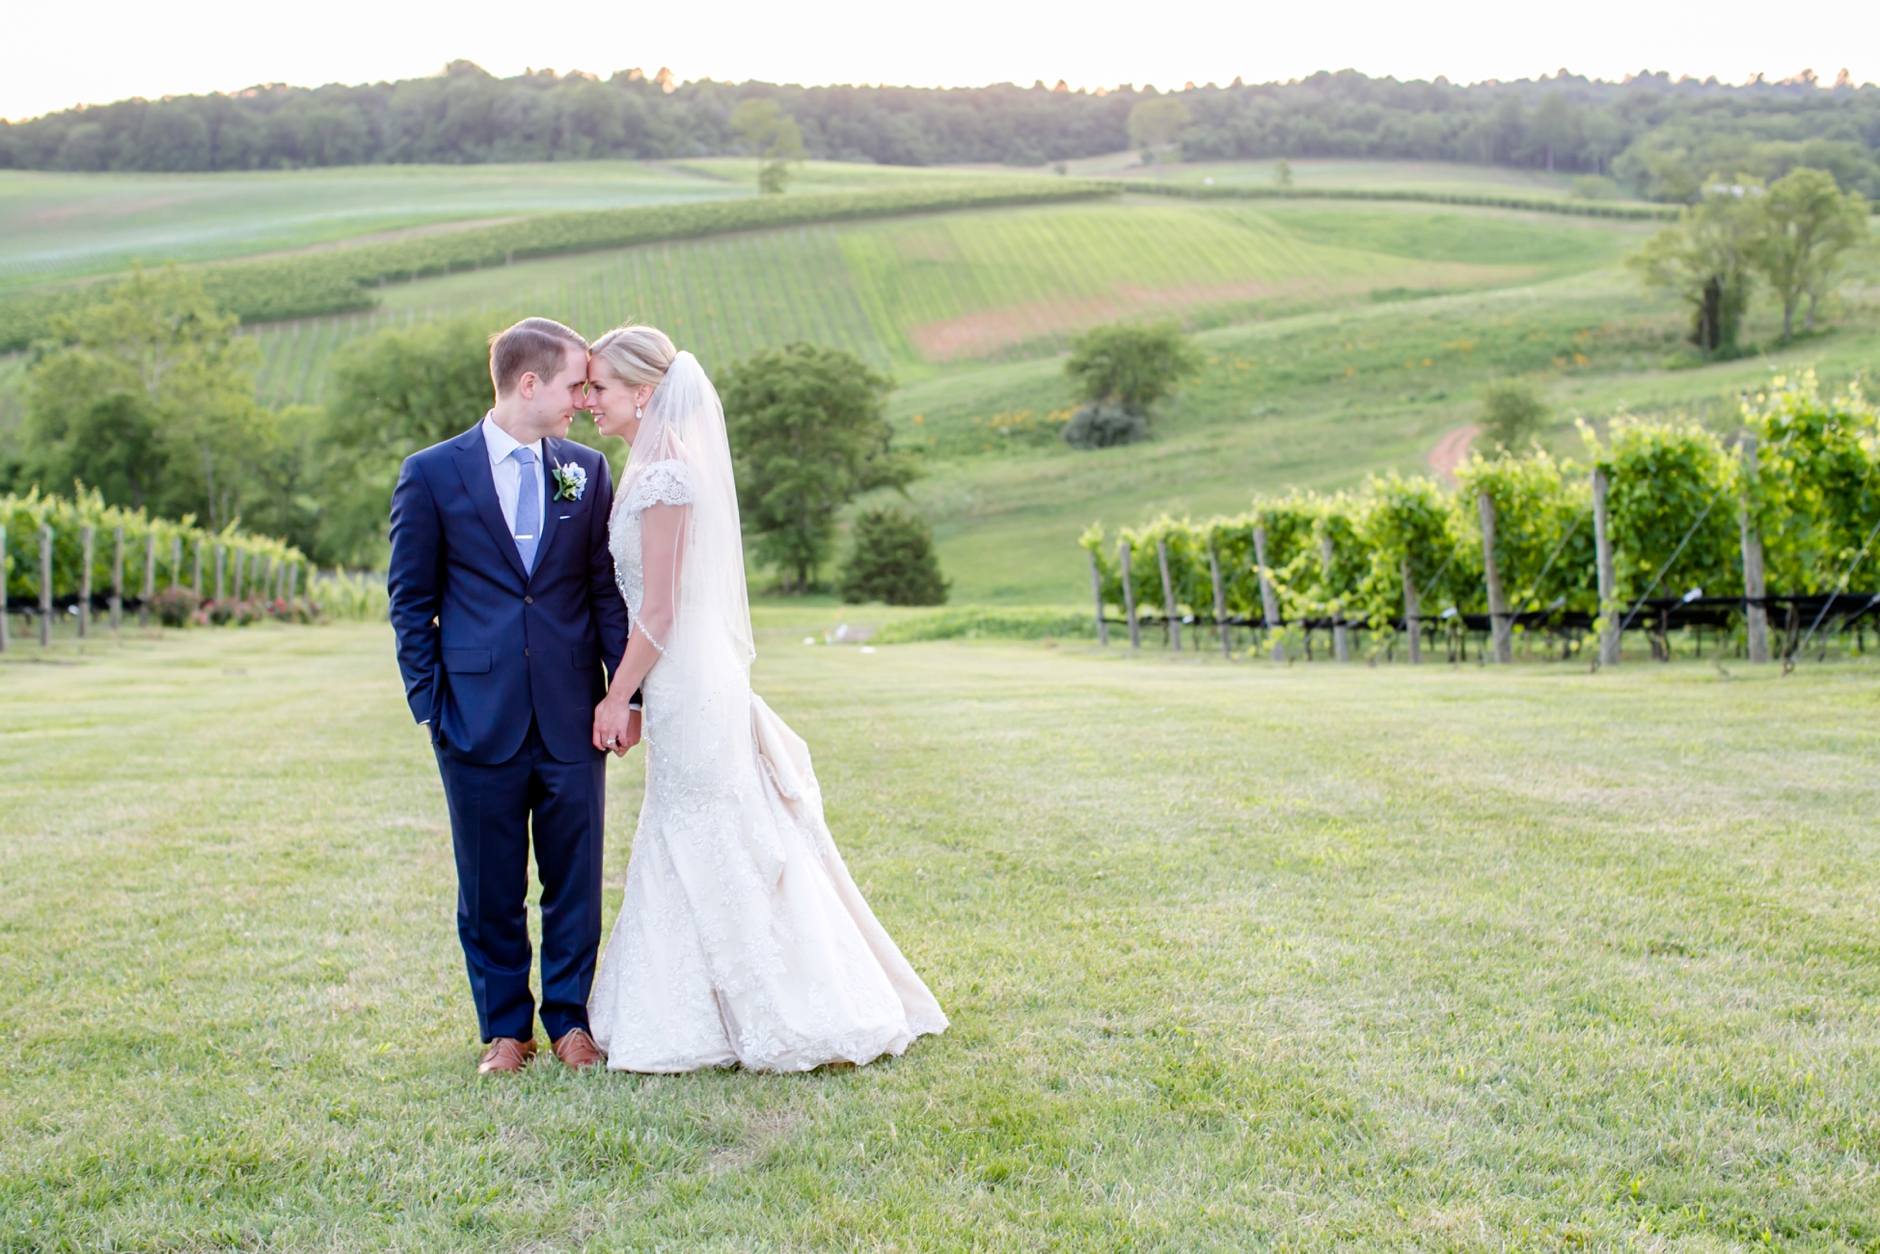 53A-Stone-Tower-Winery-Summer-Wedding-GG-1200